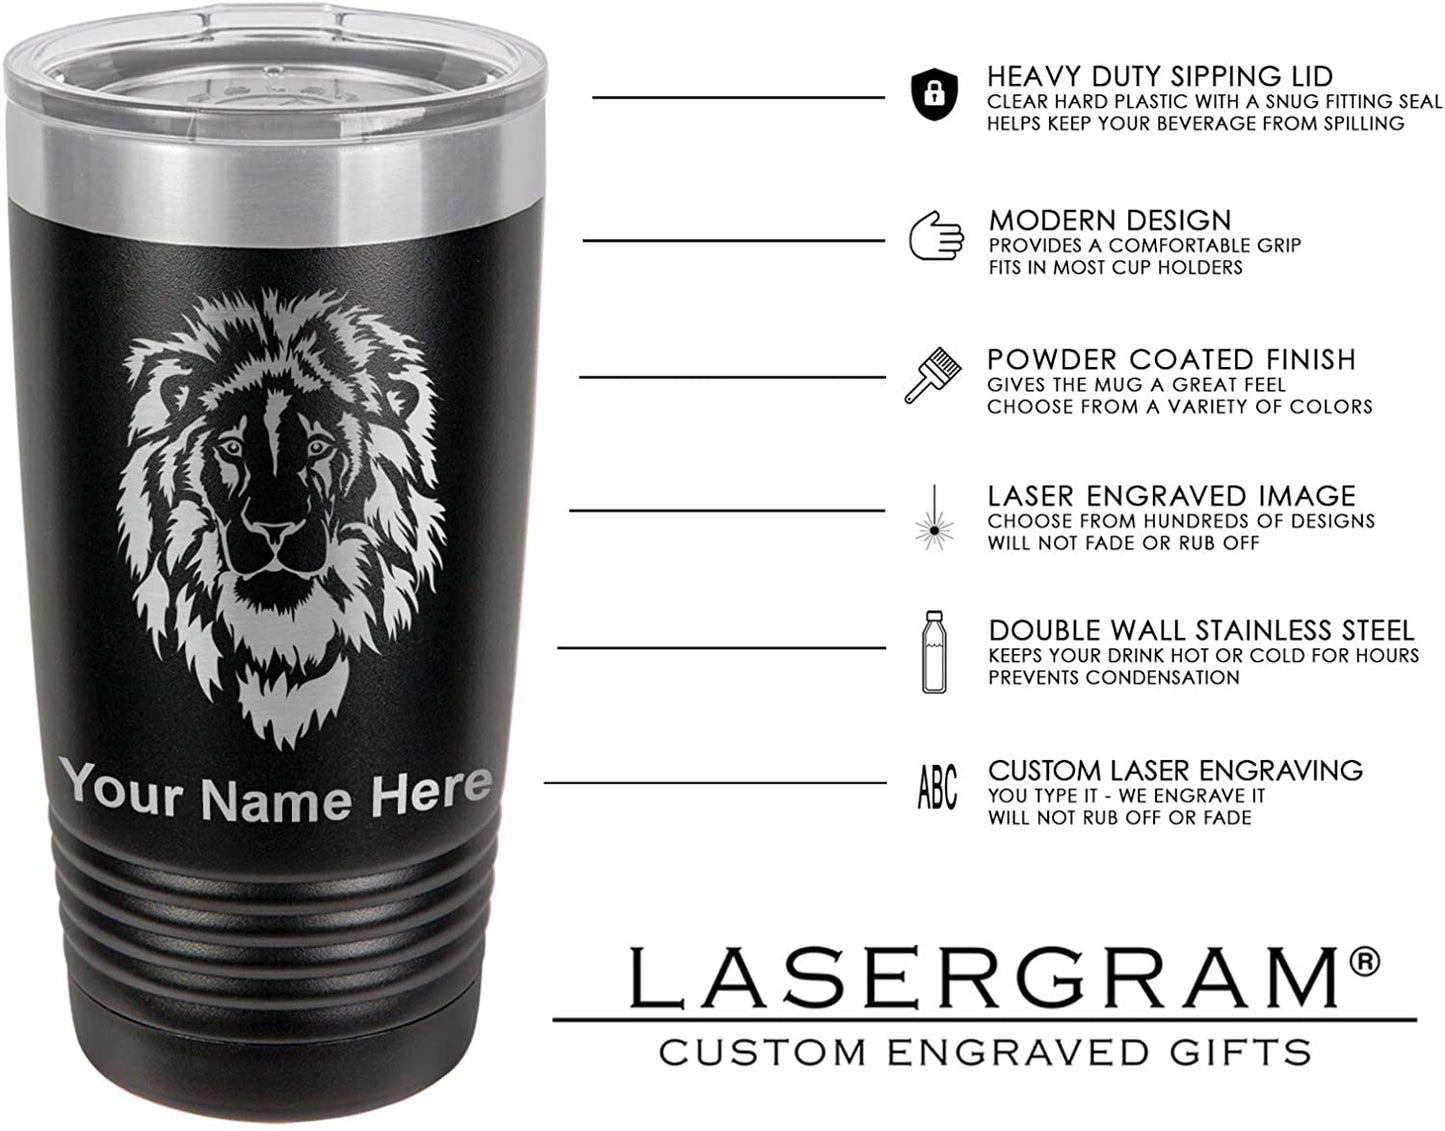 20oz Vacuum Insulated Tumbler Mug, Dolphin, Personalized Engraving Included